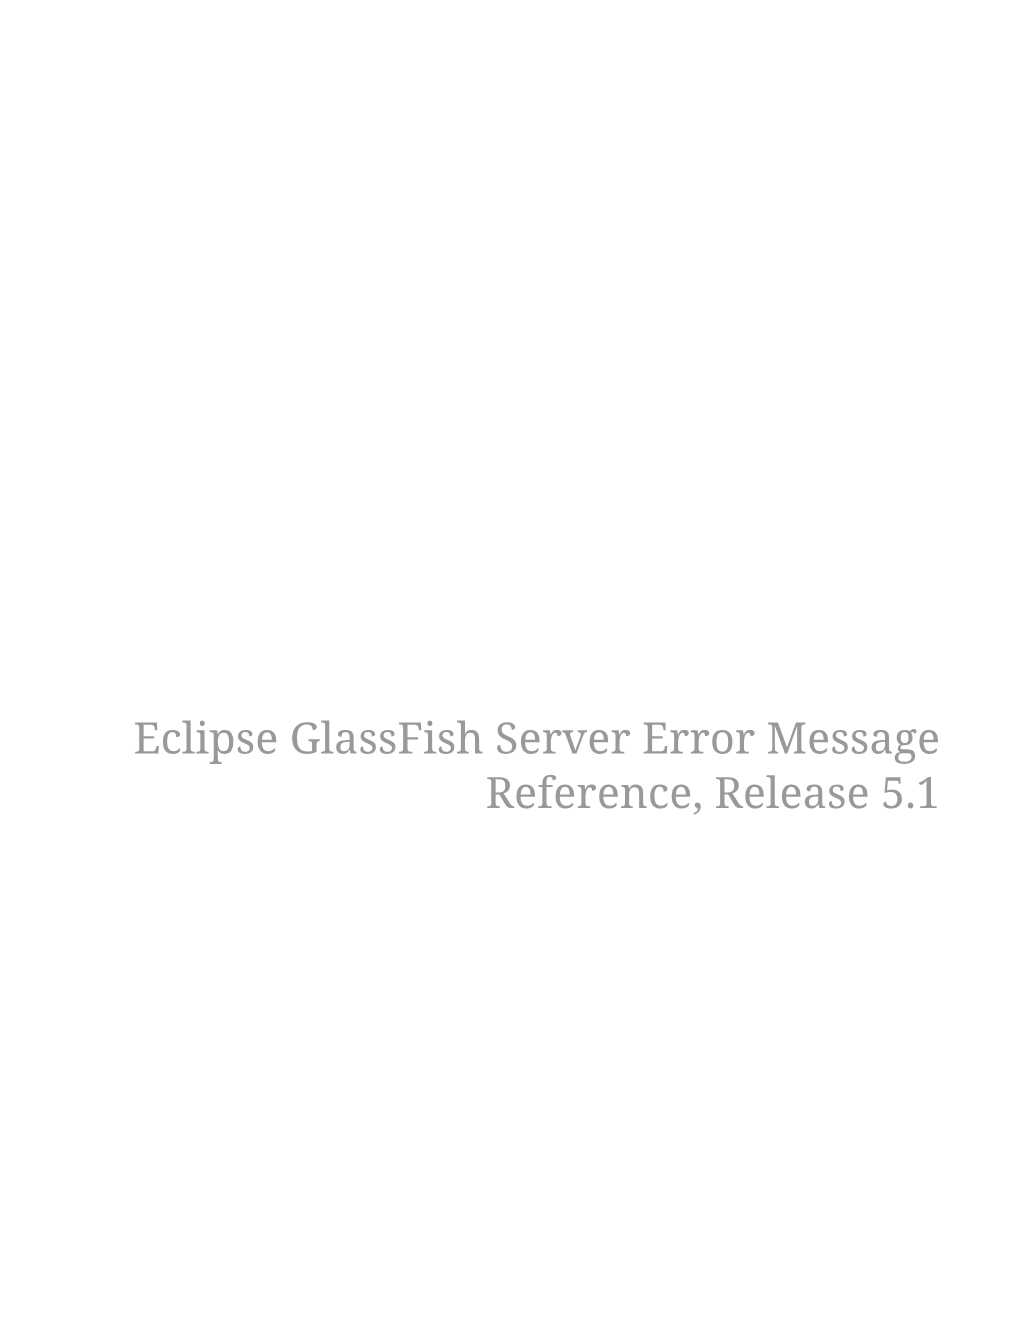 Eclipse Glassfish Server Error Message Reference, Release 5.1 Table of Contents